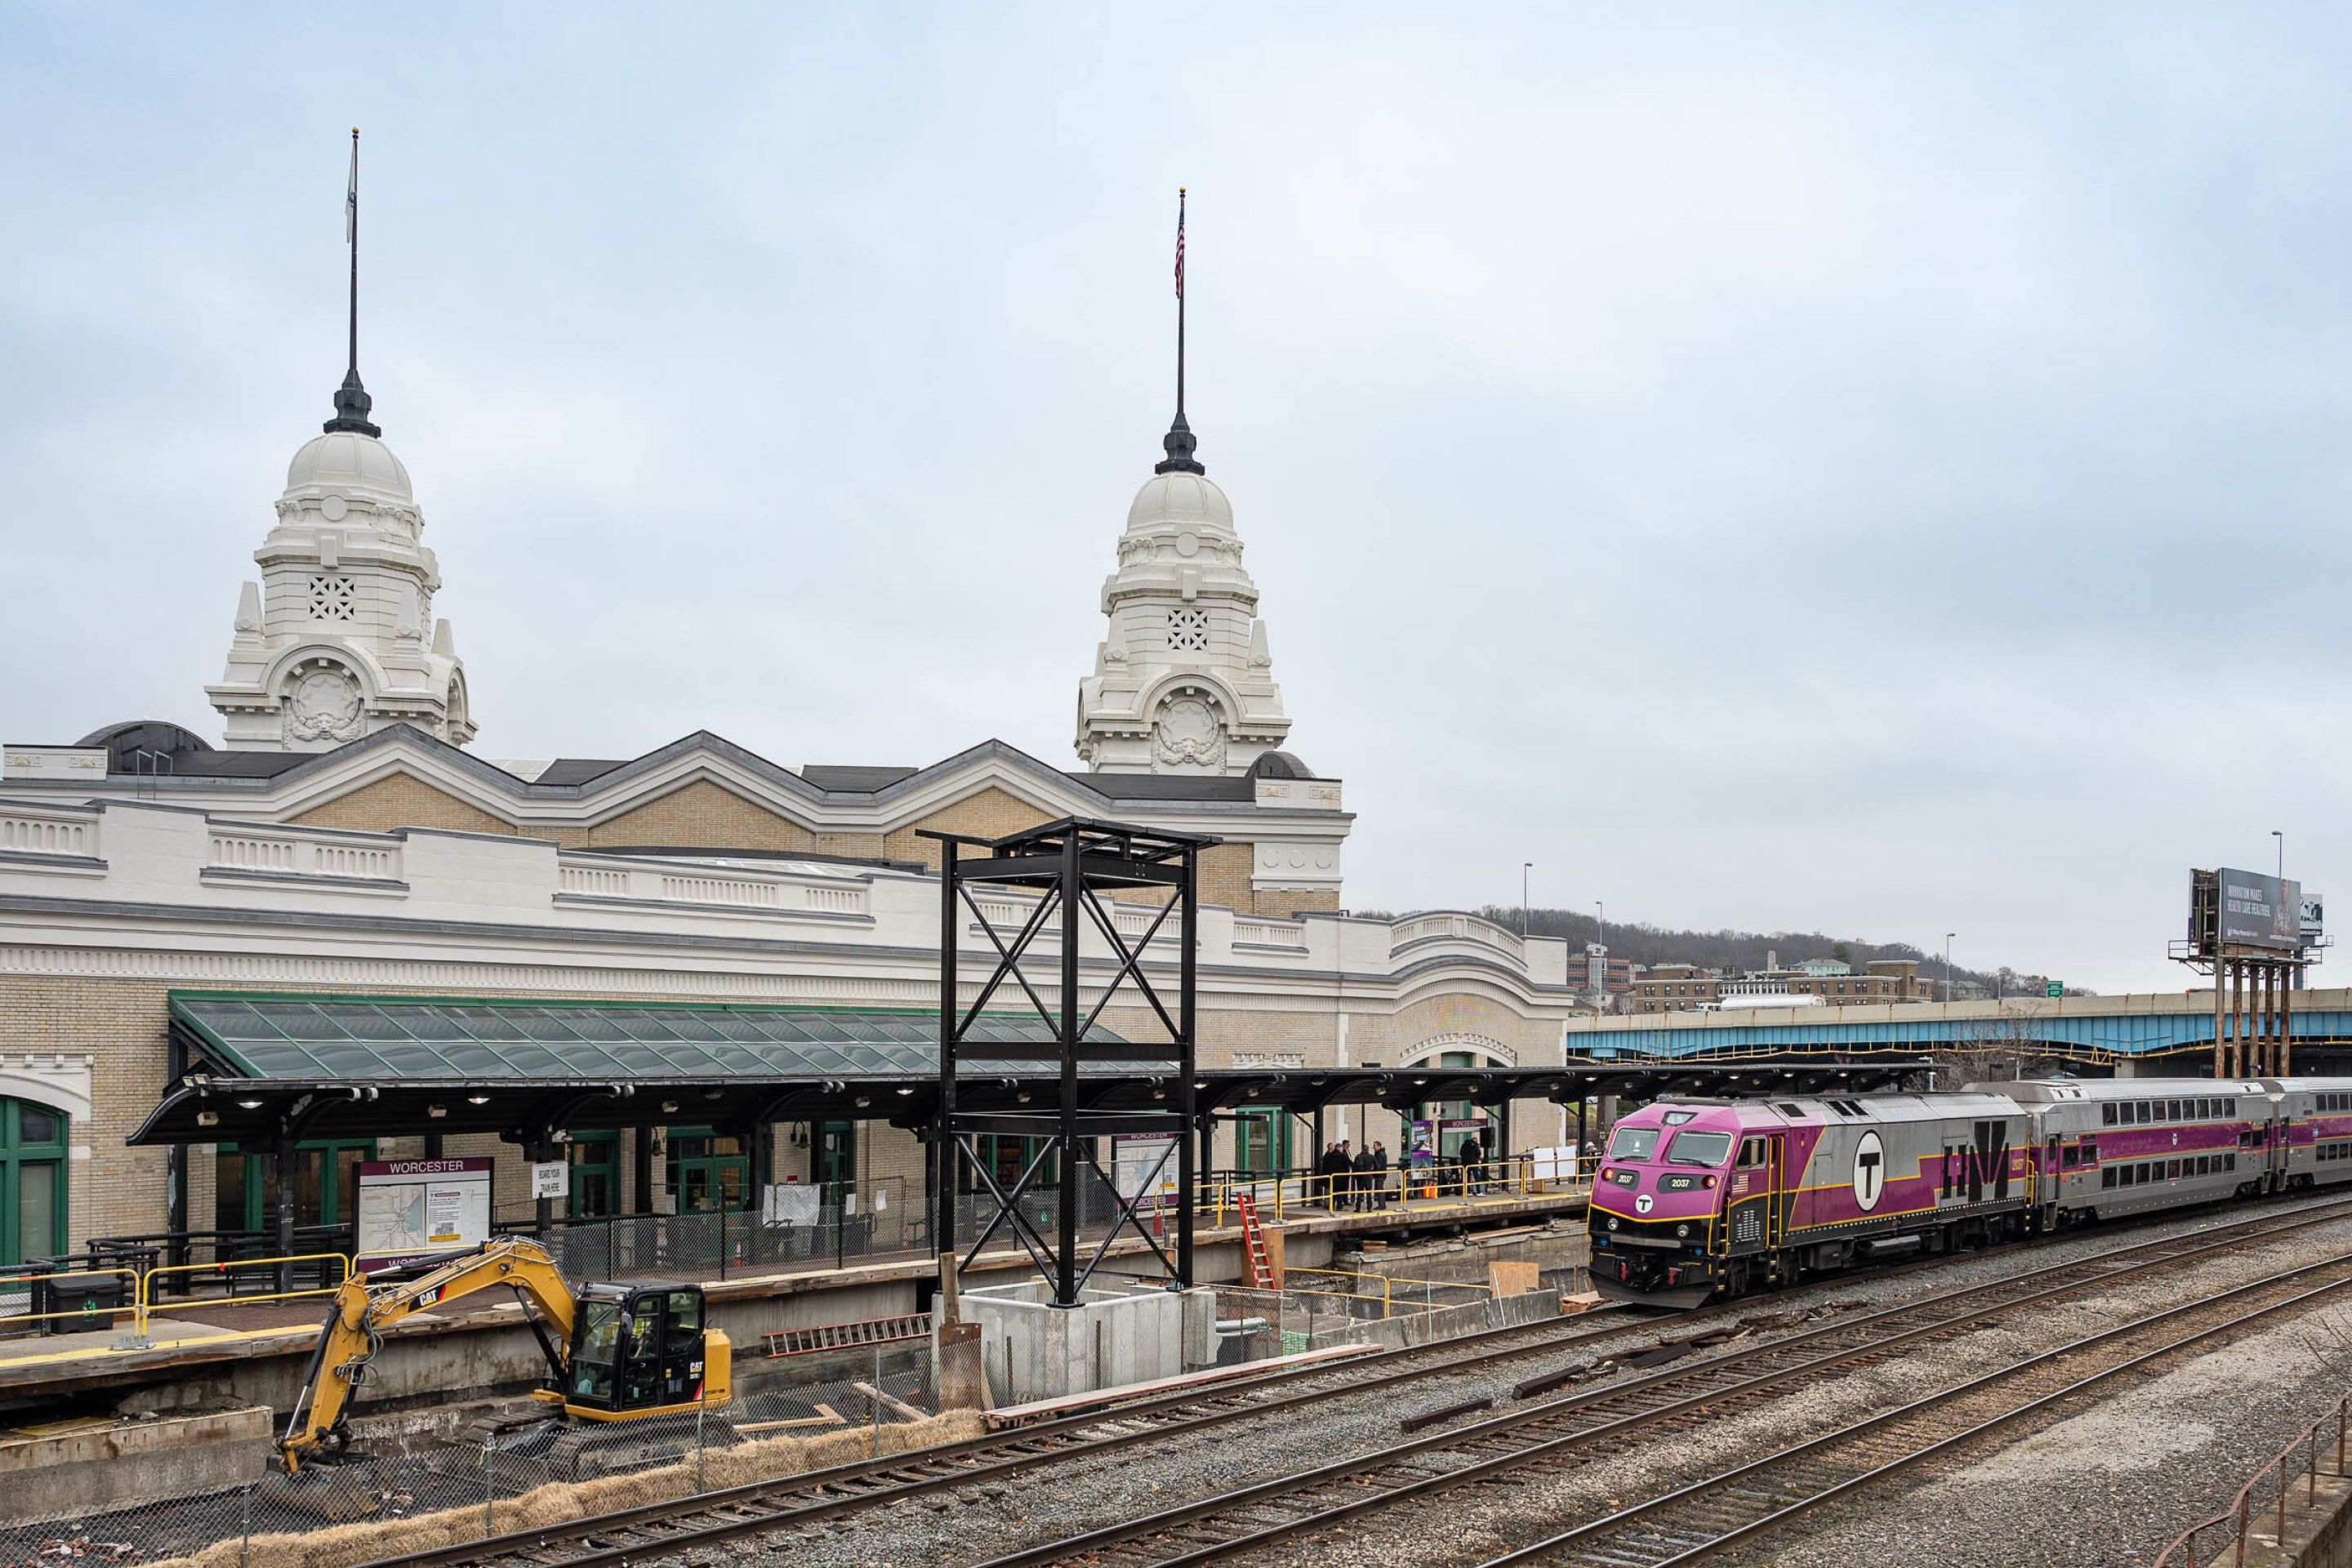 An MBTA commuter rail train with a purple front and a T logo on its side approaches an under-construction station platform in the center of the image. In the right foreground are two other railroad tracks. To the left behind the platform are two domed spires rising above a train station building.